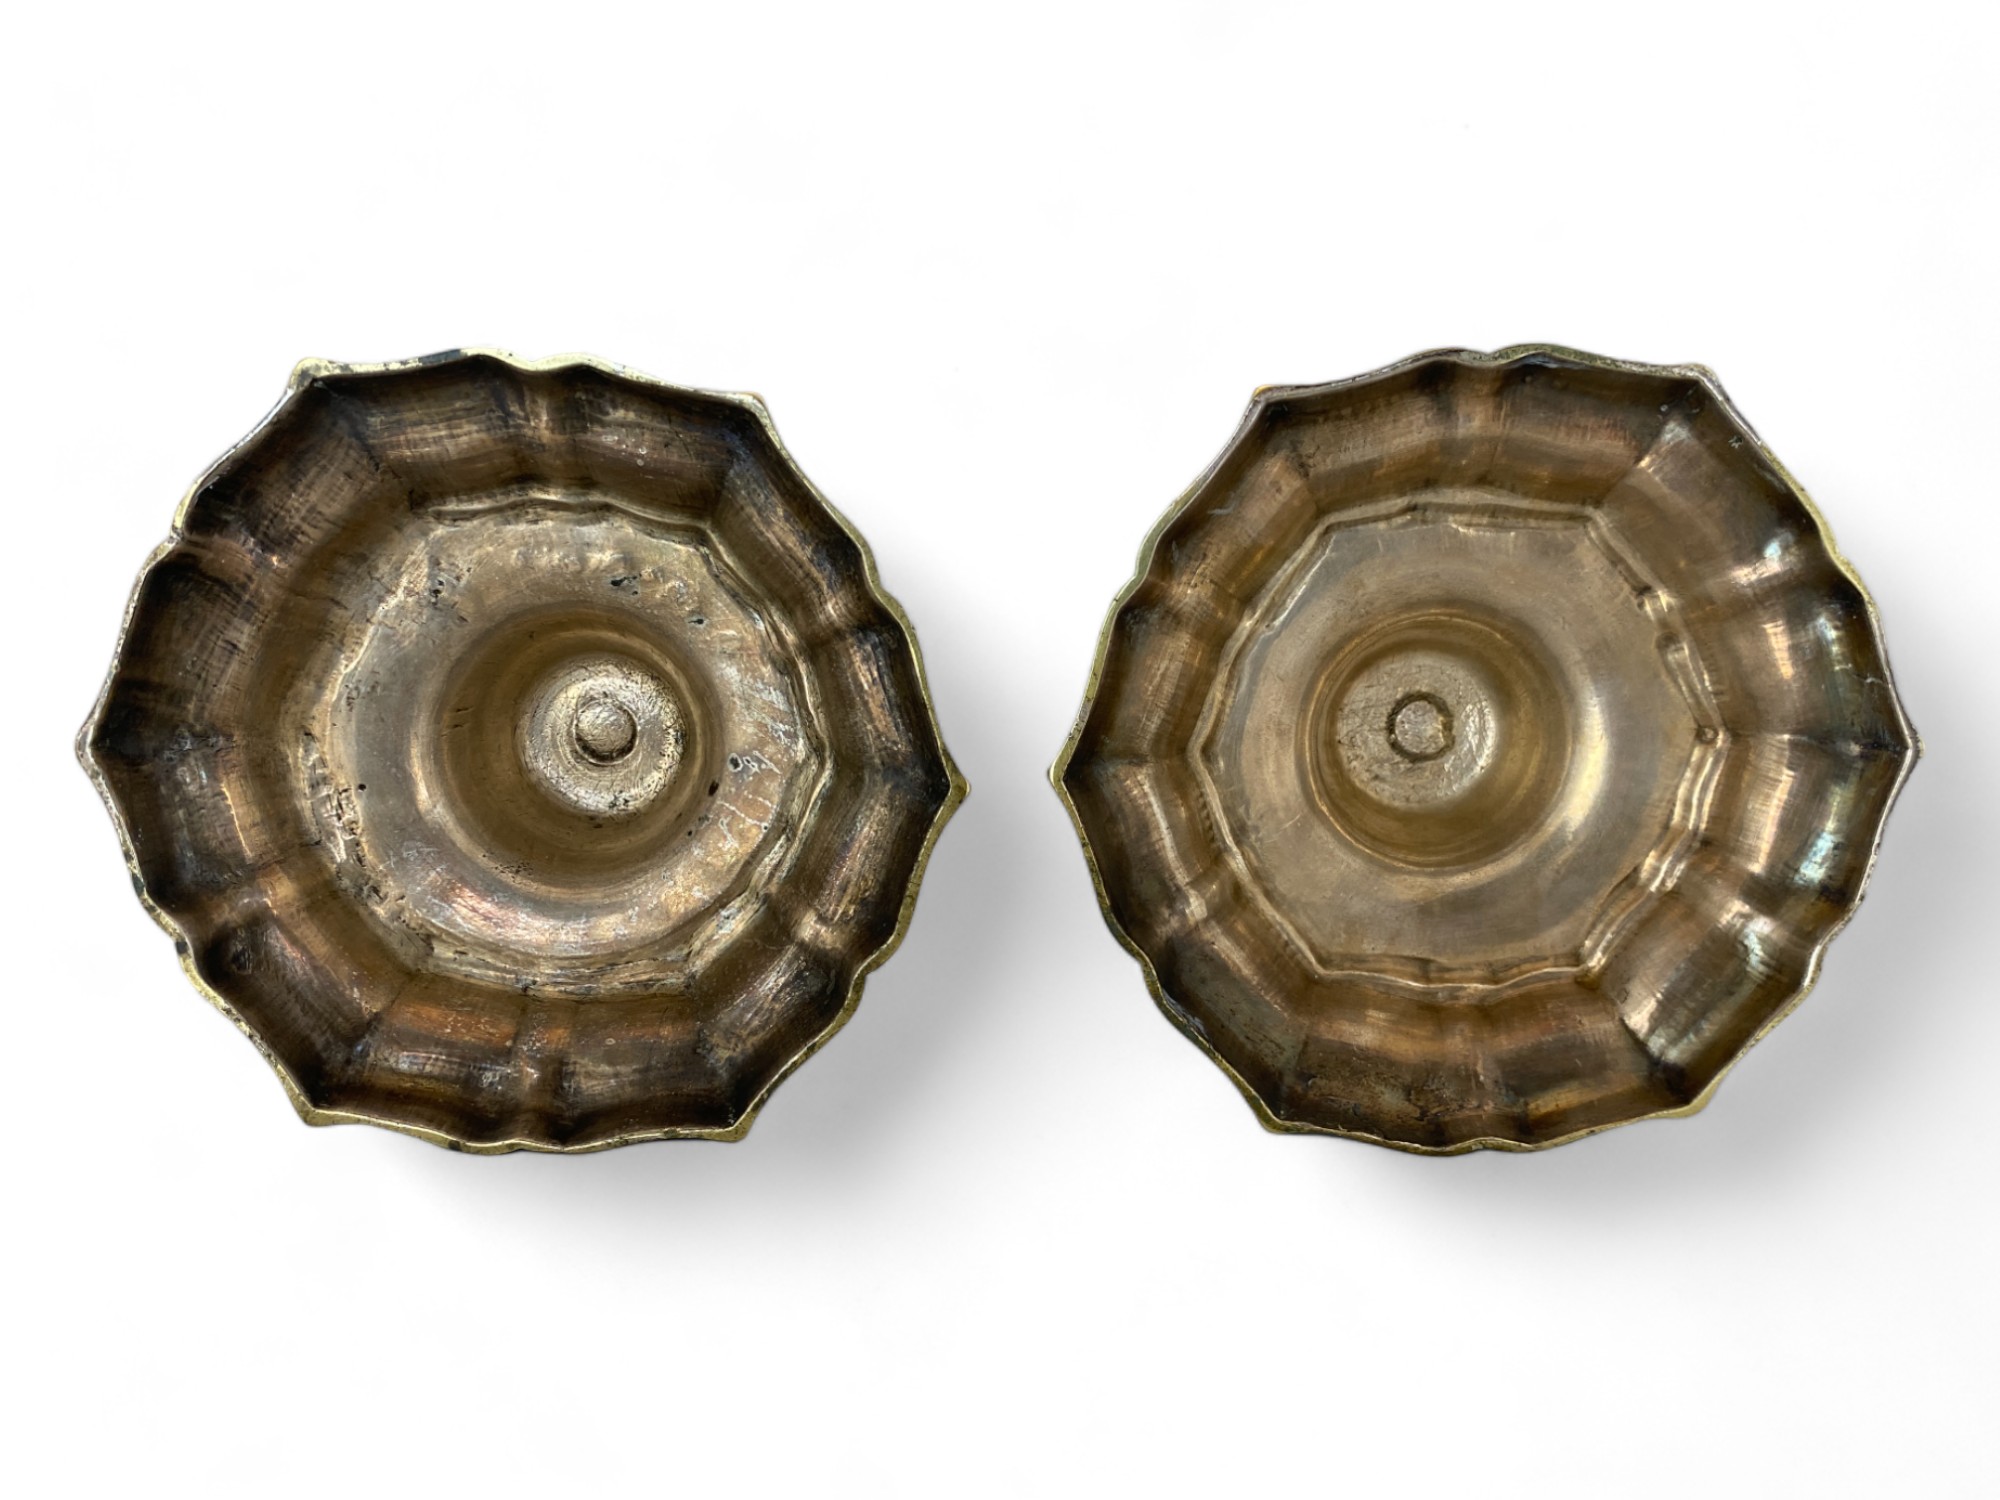 A closely matched pair of French Regence style silvered brass candlesticks, probably early 18th cent - Image 5 of 5